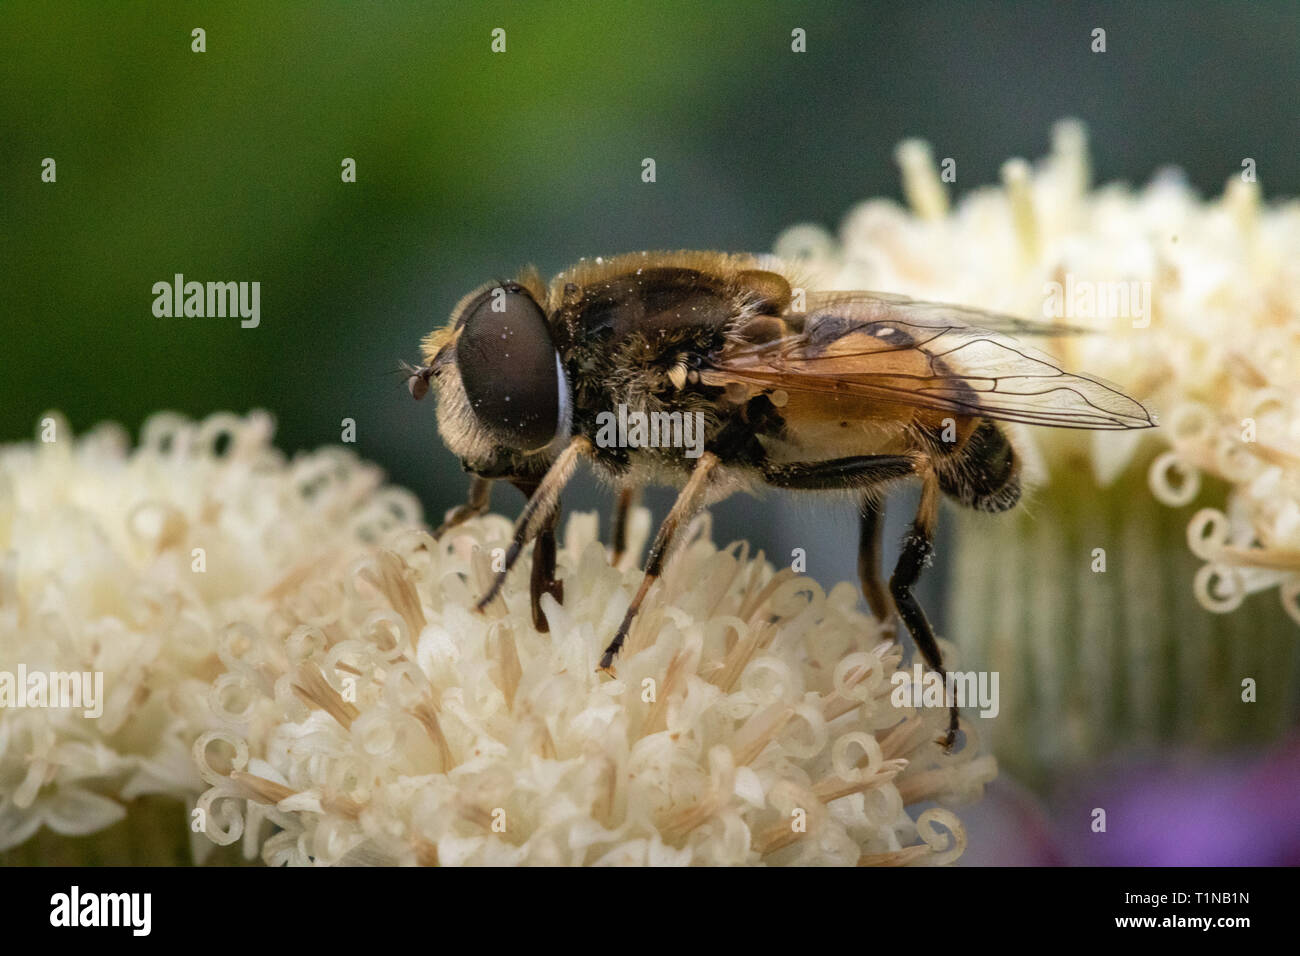 Close-Up Head of a Drone Hover fly (Eristalis tenax), Speckled with Pollen, Feeding from a White Garden Flower in Summer. Stock Photo